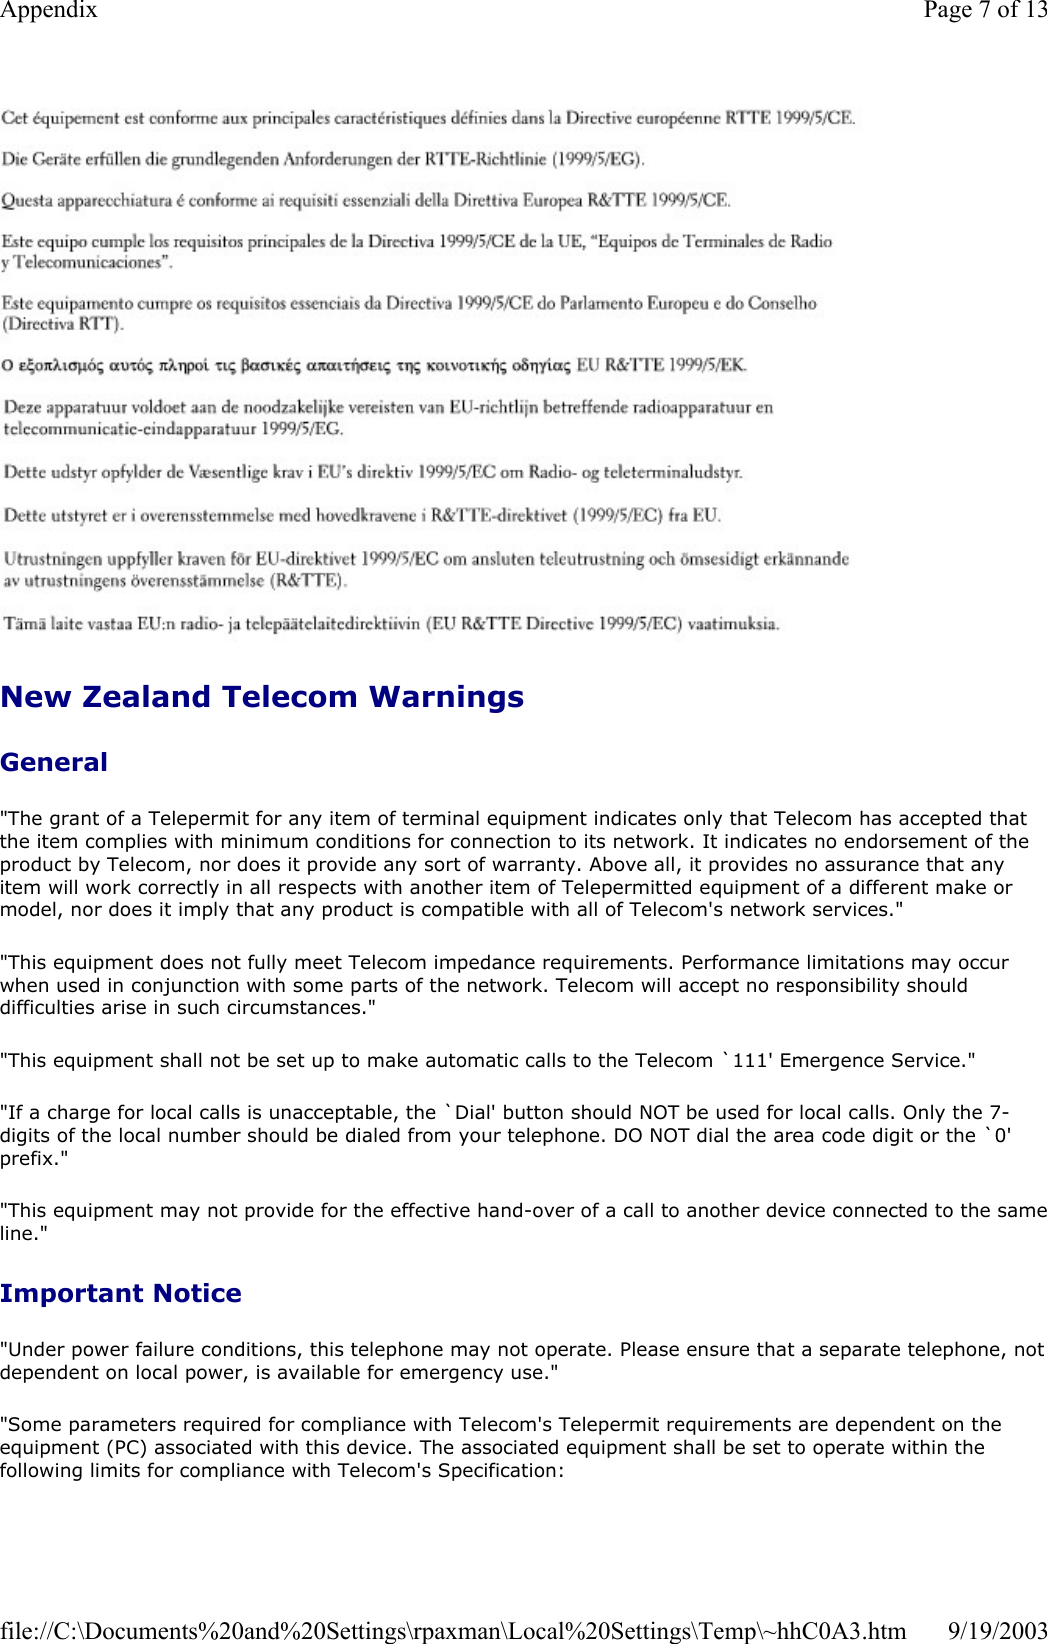   New Zealand Telecom Warnings General &quot;The grant of a Telepermit for any item of terminal equipment indicates only that Telecom has accepted that the item complies with minimum conditions for connection to its network. It indicates no endorsement of the product by Telecom, nor does it provide any sort of warranty. Above all, it provides no assurance that any item will work correctly in all respects with another item of Telepermitted equipment of a different make or model, nor does it imply that any product is compatible with all of Telecom&apos;s network services.&quot; &quot;This equipment does not fully meet Telecom impedance requirements. Performance limitations may occur when used in conjunction with some parts of the network. Telecom will accept no responsibility should difficulties arise in such circumstances.&quot; &quot;This equipment shall not be set up to make automatic calls to the Telecom `111&apos; Emergence Service.&quot; &quot;If a charge for local calls is unacceptable, the `Dial&apos; button should NOT be used for local calls. Only the 7-digits of the local number should be dialed from your telephone. DO NOT dial the area code digit or the `0&apos; prefix.&quot; &quot;This equipment may not provide for the effective hand-over of a call to another device connected to the sameline.&quot; Important Notice &quot;Under power failure conditions, this telephone may not operate. Please ensure that a separate telephone, not dependent on local power, is available for emergency use.&quot; &quot;Some parameters required for compliance with Telecom&apos;s Telepermit requirements are dependent on the equipment (PC) associated with this device. The associated equipment shall be set to operate within the following limits for compliance with Telecom&apos;s Specification: Page 7 of 13Appendix9/19/2003file://C:\Documents%20and%20Settings\rpaxman\Local%20Settings\Temp\~hhC0A3.htm